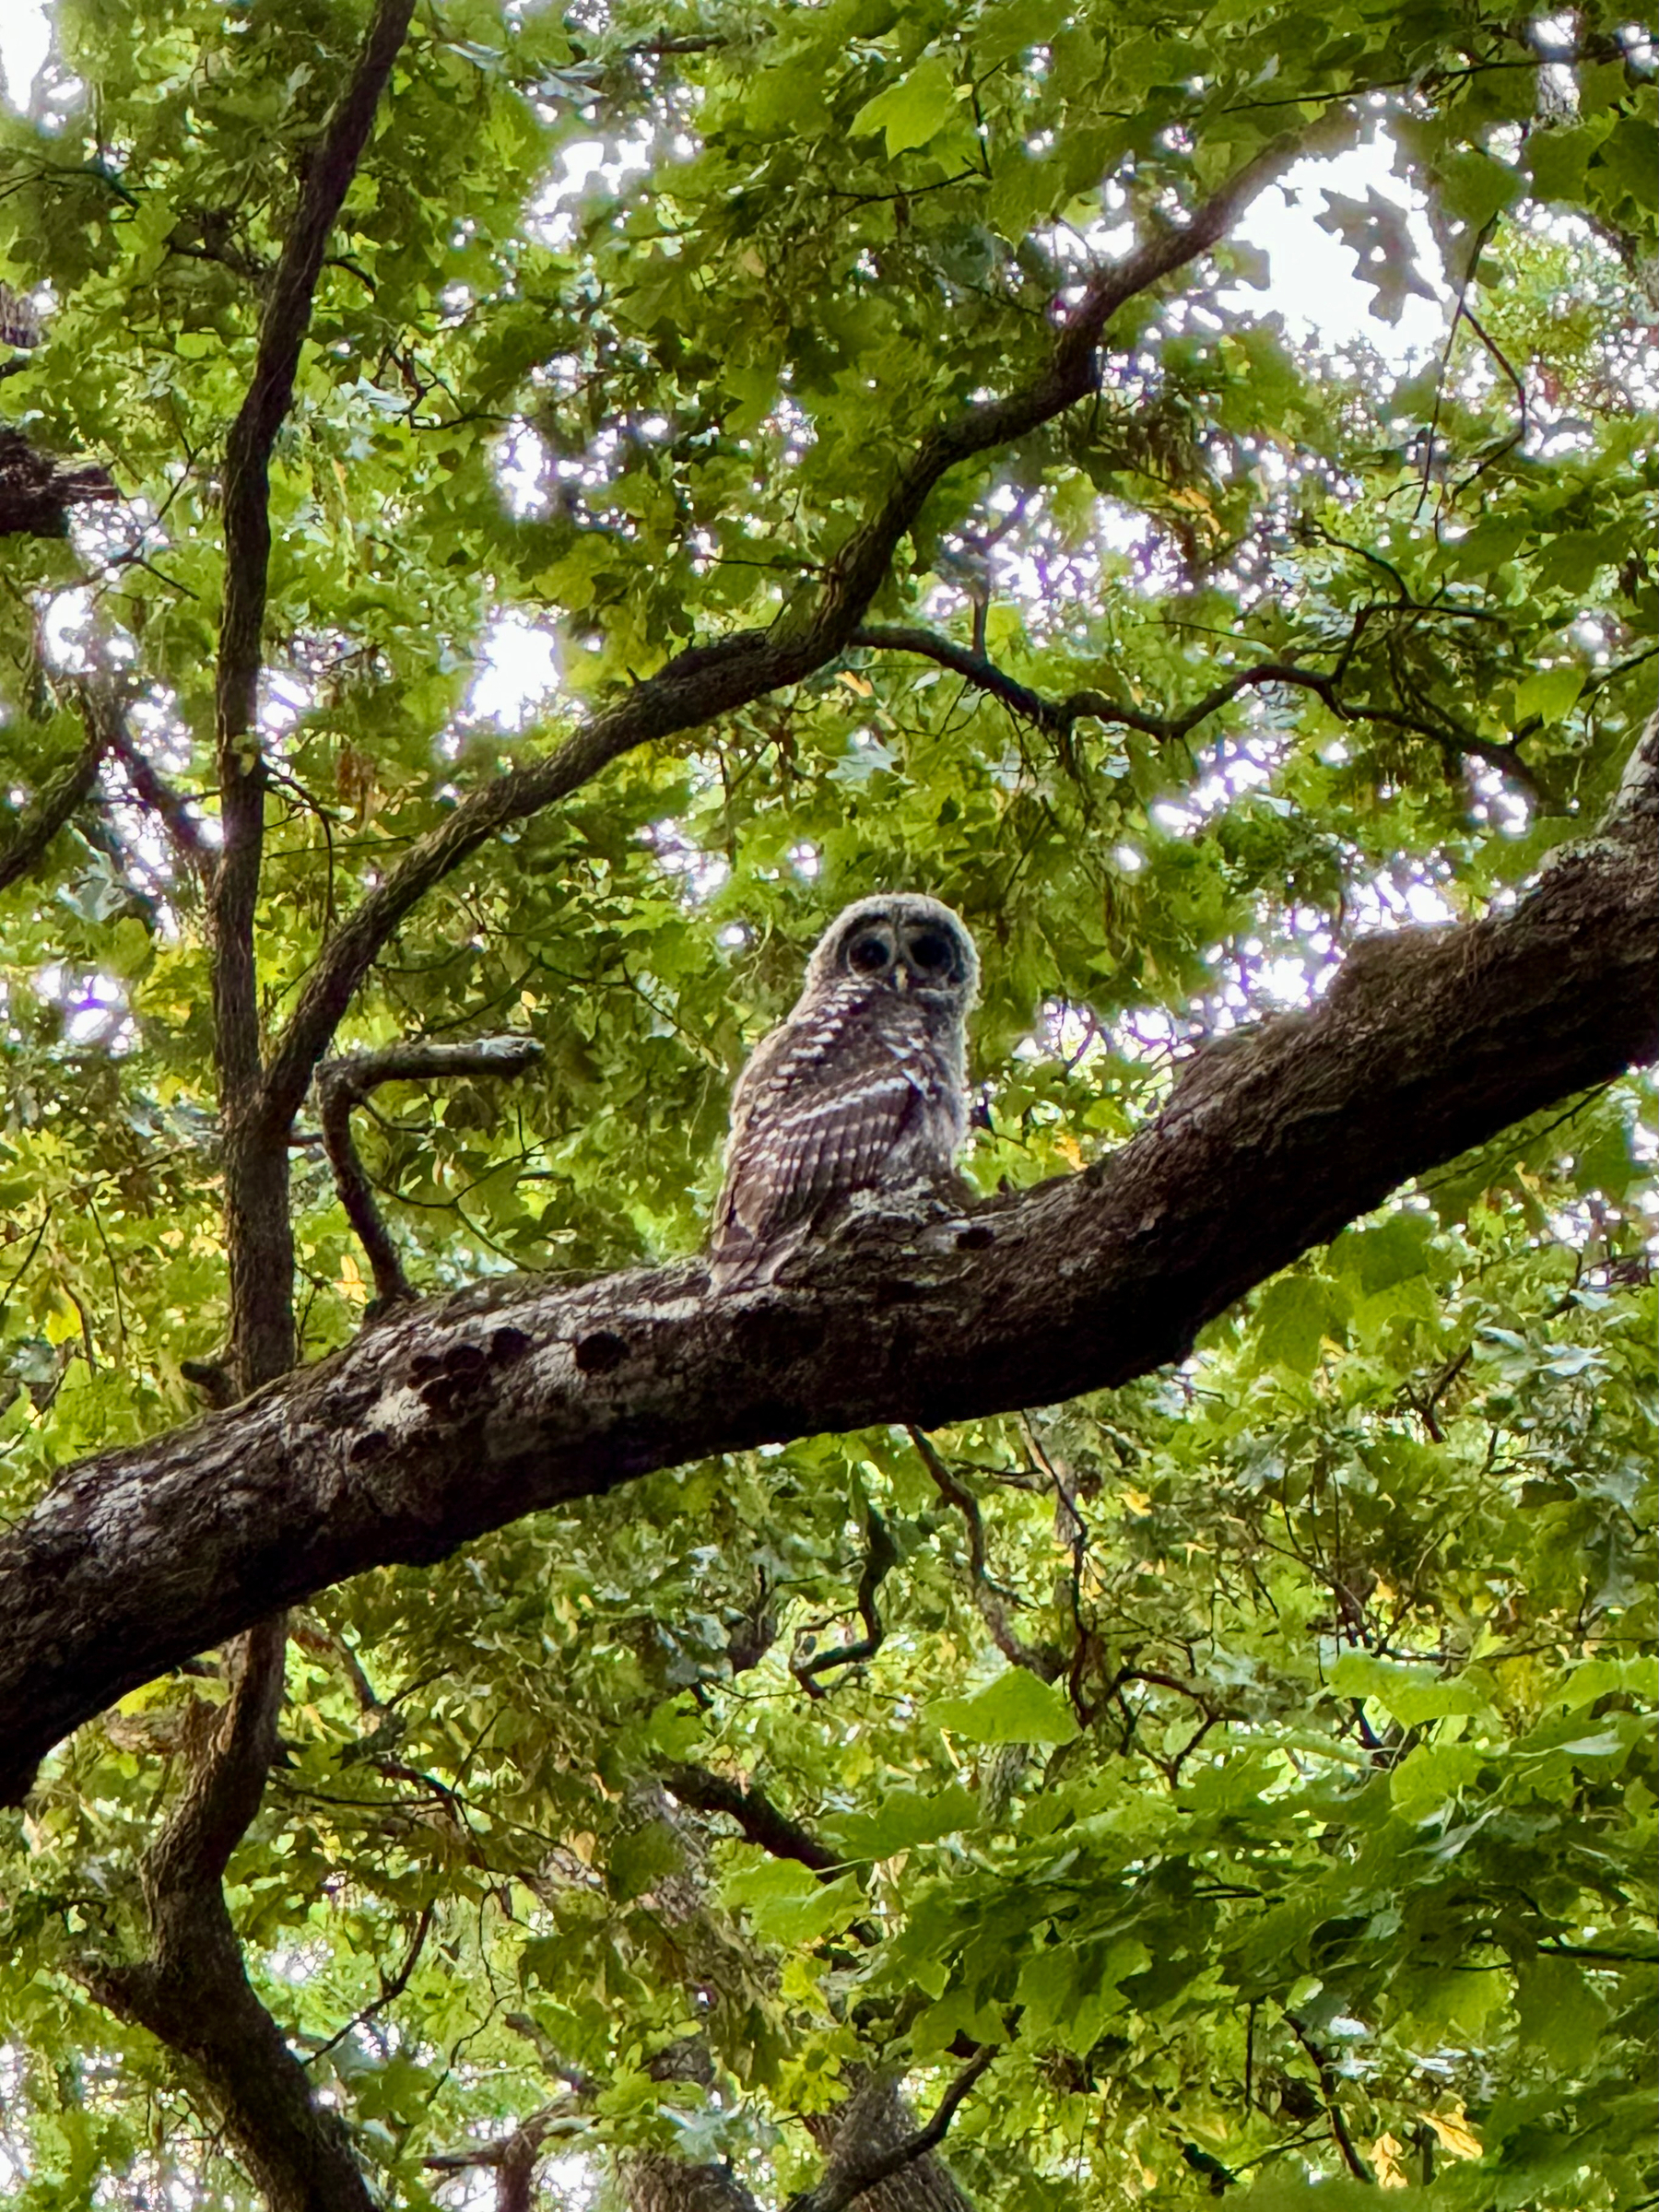 An juvenile barred owl perched on a tree branch surrounded by green leaves.